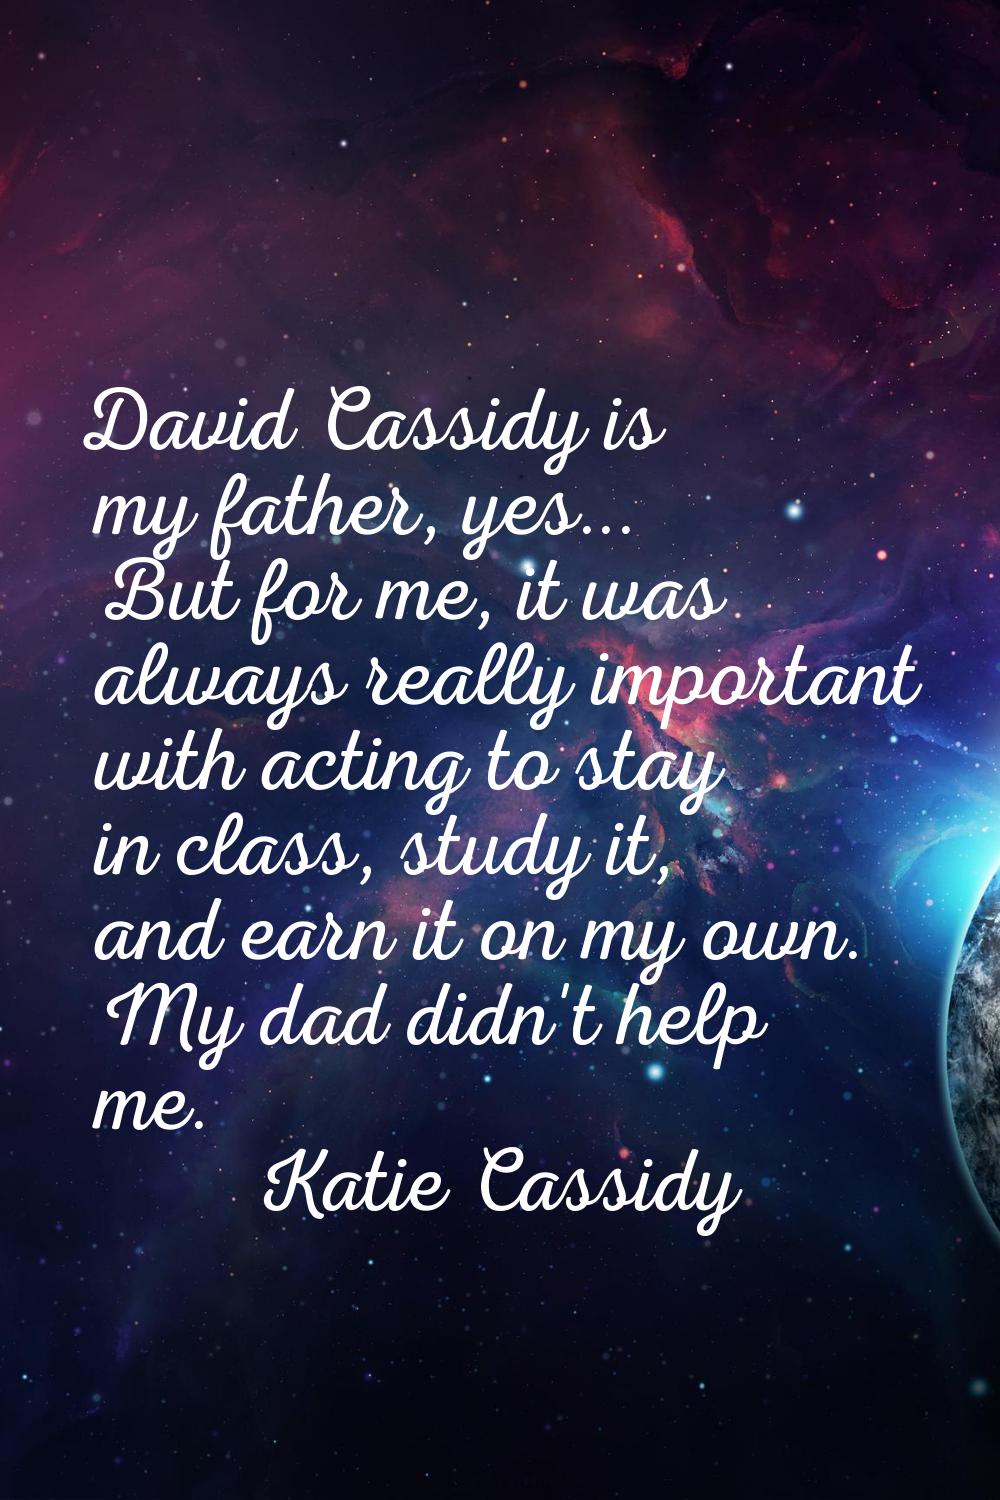 David Cassidy is my father, yes... But for me, it was always really important with acting to stay i